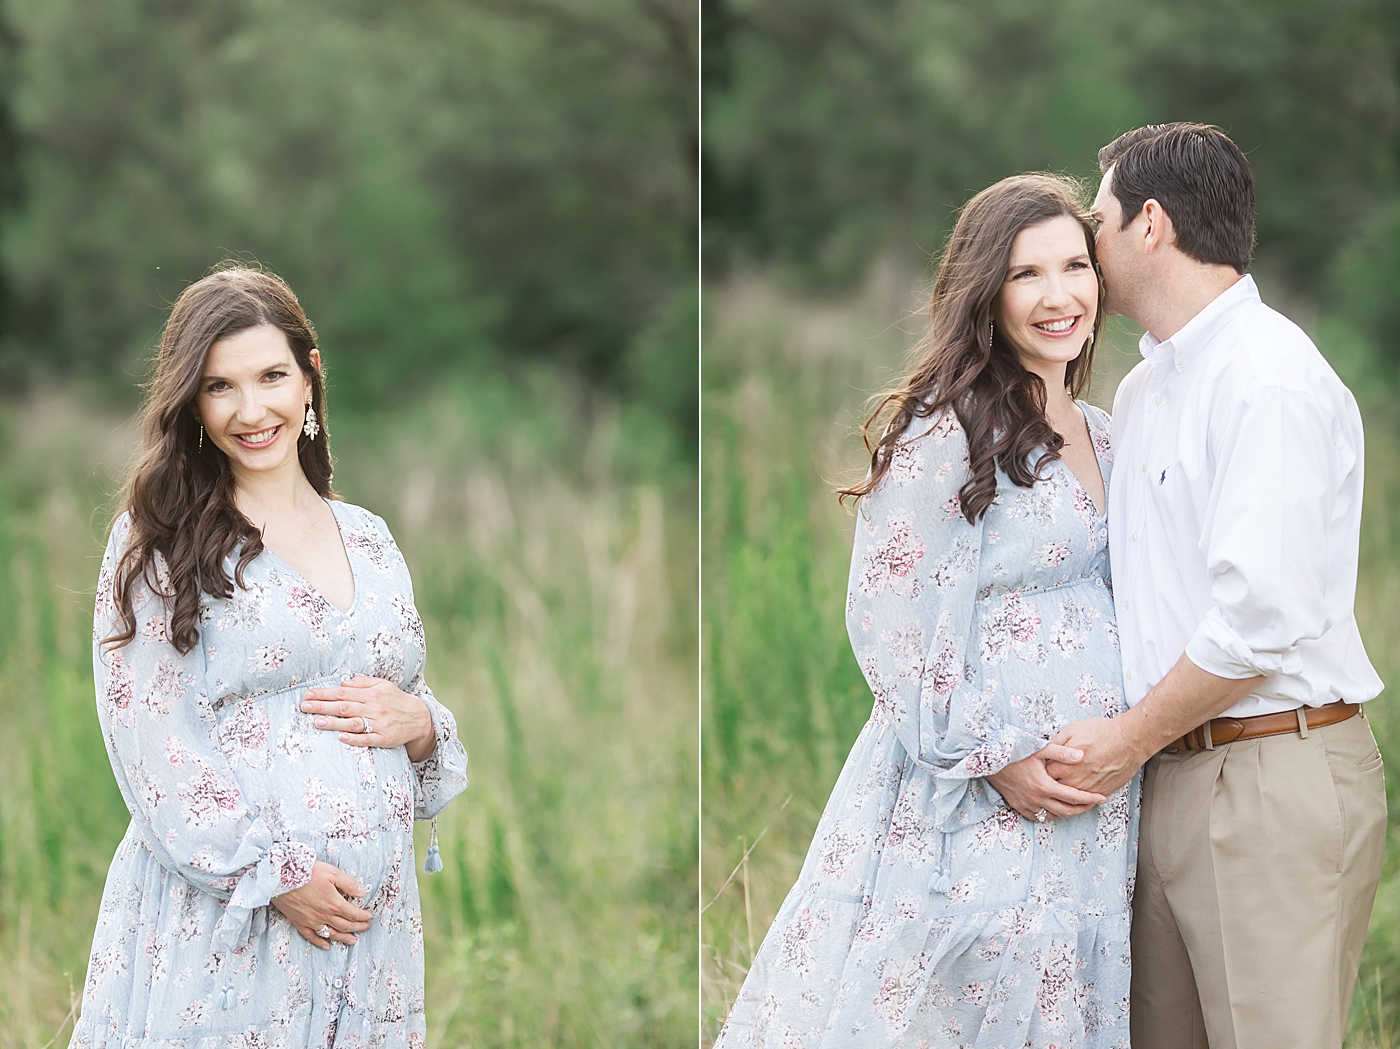 Outdoor maternity session in field in Houston, TX. Photo by Fresh Light Photography.